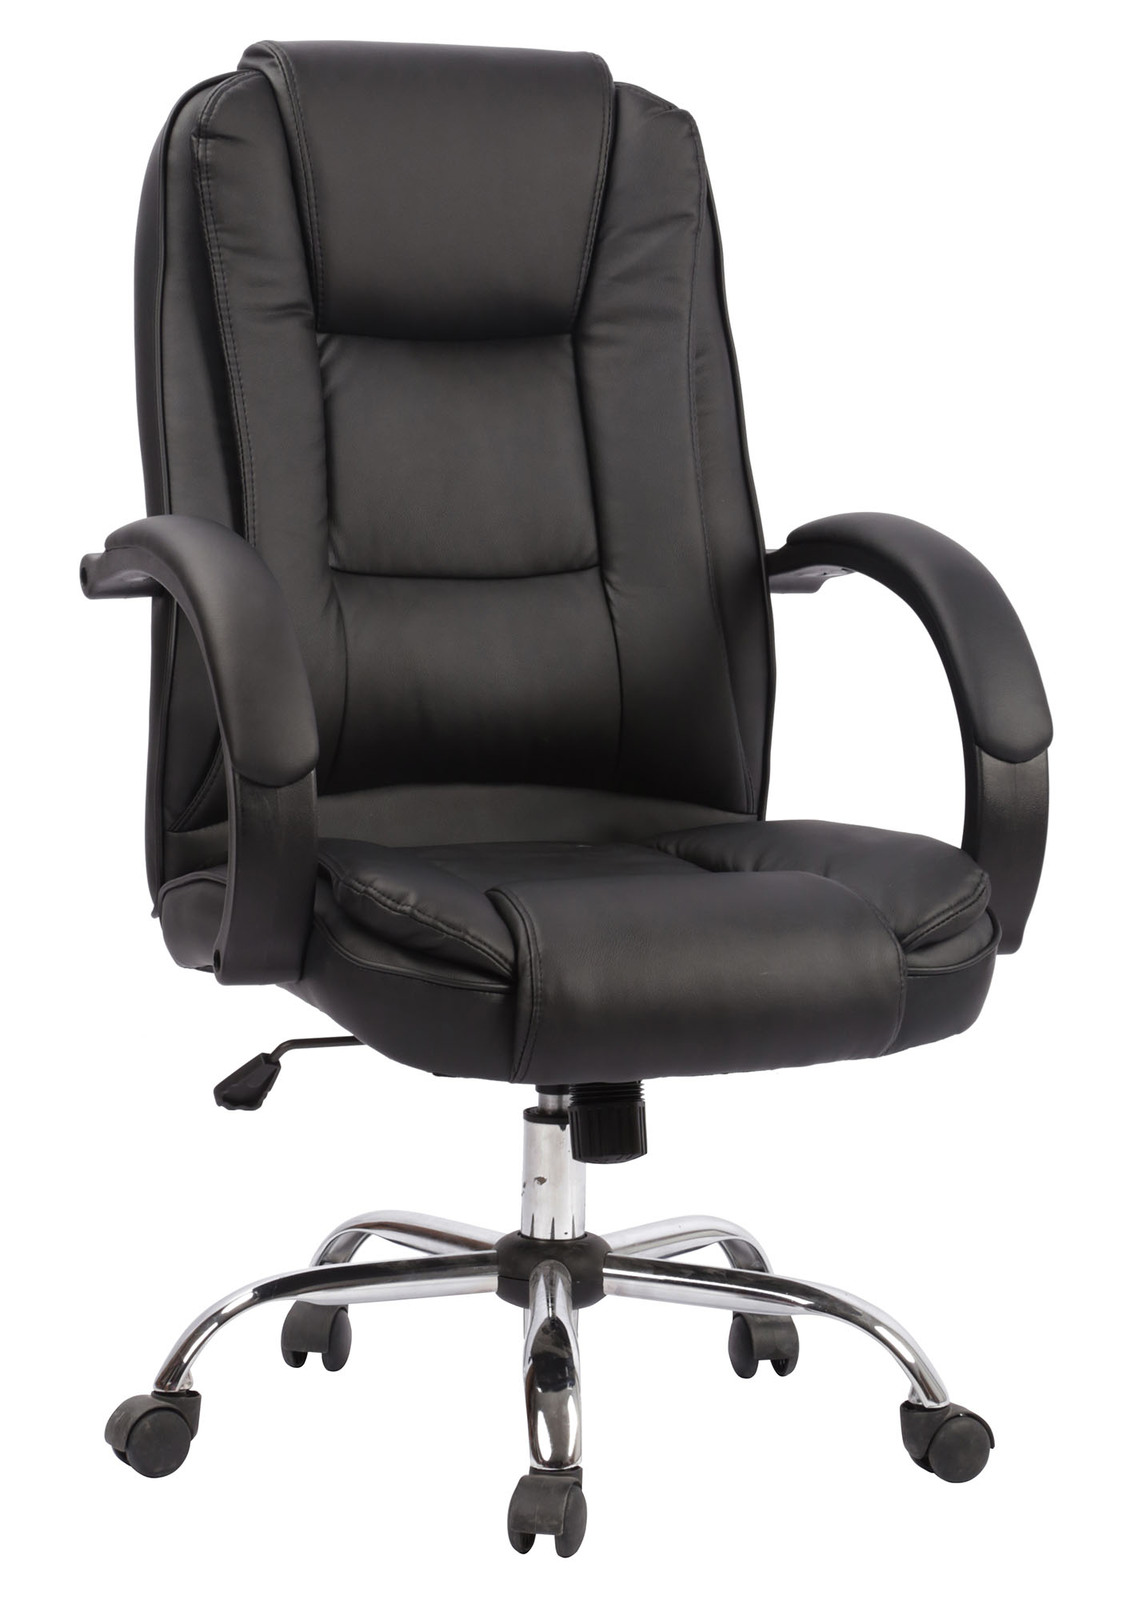 EXEC PREM PU LEATHER OFFICE COMP WORK CHAIR DELUXE BLACK13